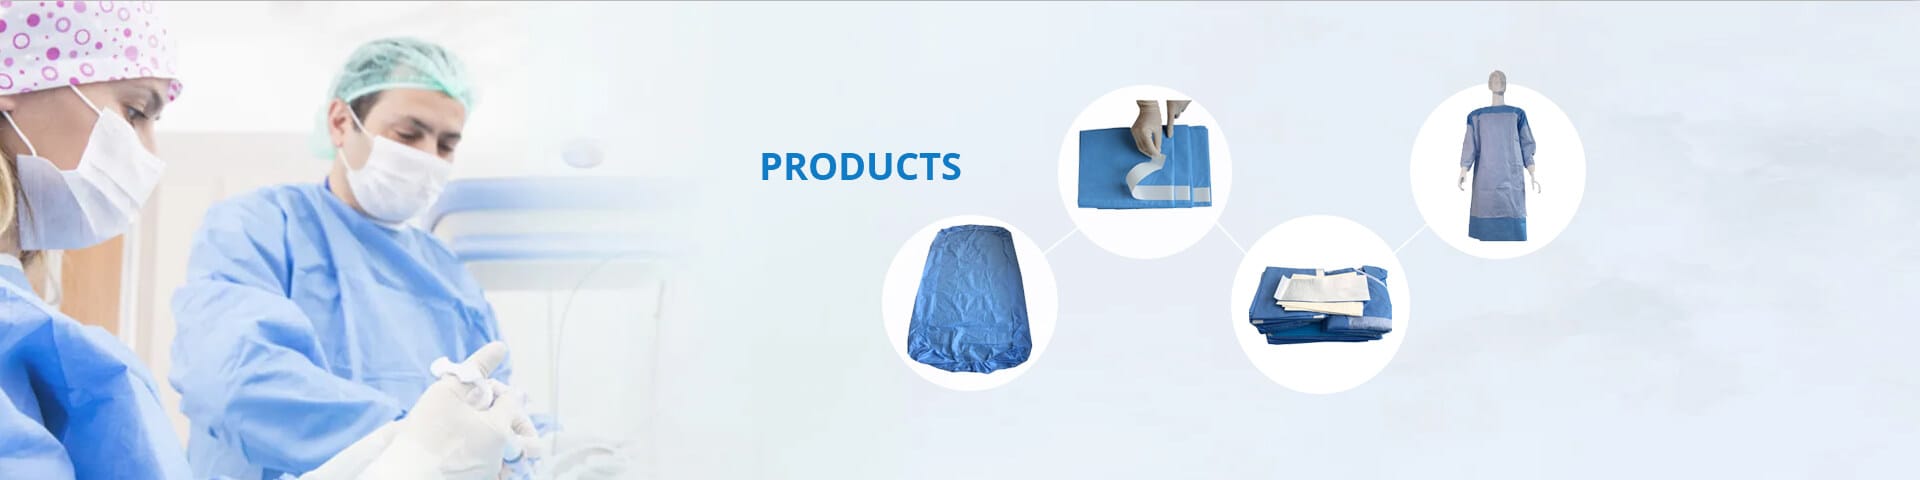 Biodegradable Hospital Bed Sheet & Cover